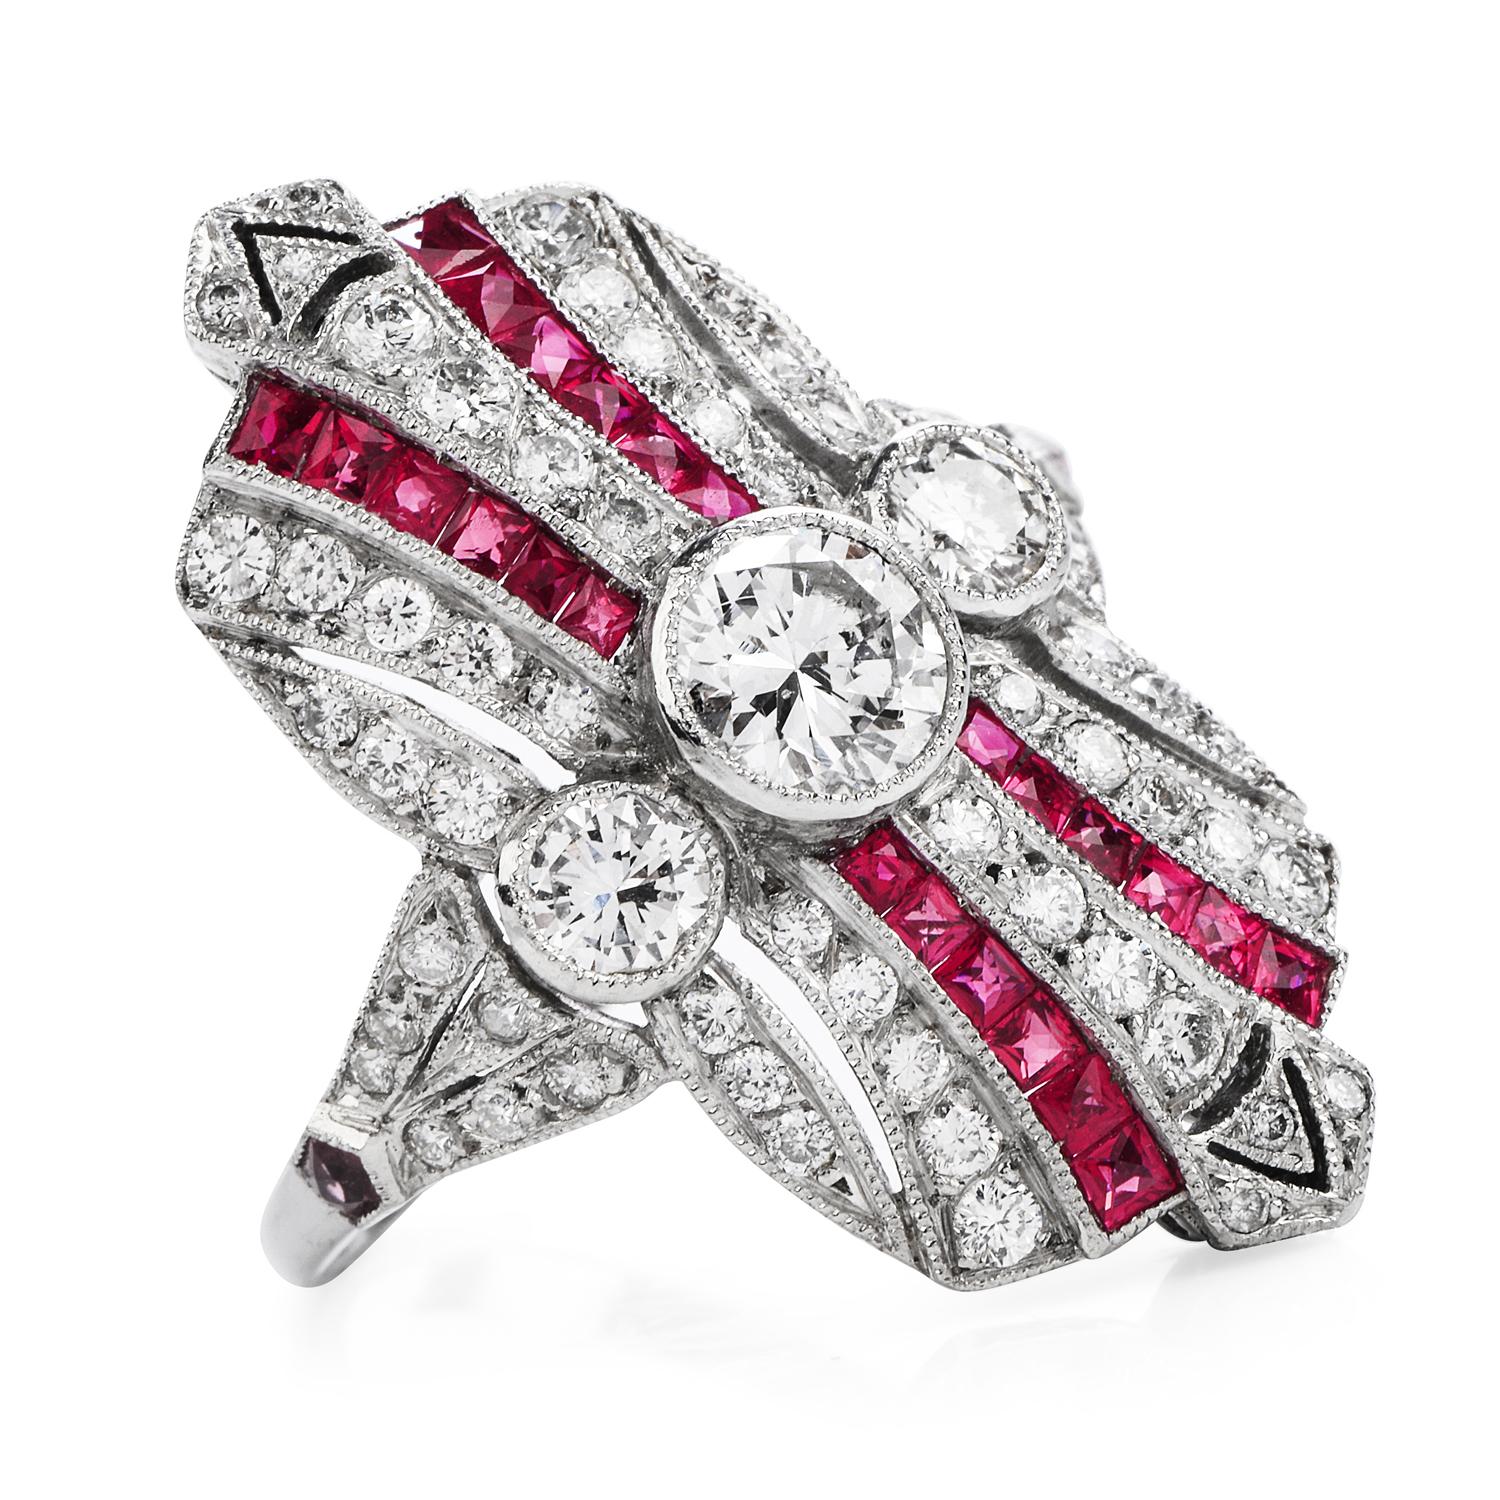 he Magnificent contrast between Diamonds and Rubies Make this Art Deco style Cocktail ring, an exquisite acquisition.

Adorning the center of this Shield Shaped design, are three round cut diamond weighing approx. 0.90 carats, G-H  color,